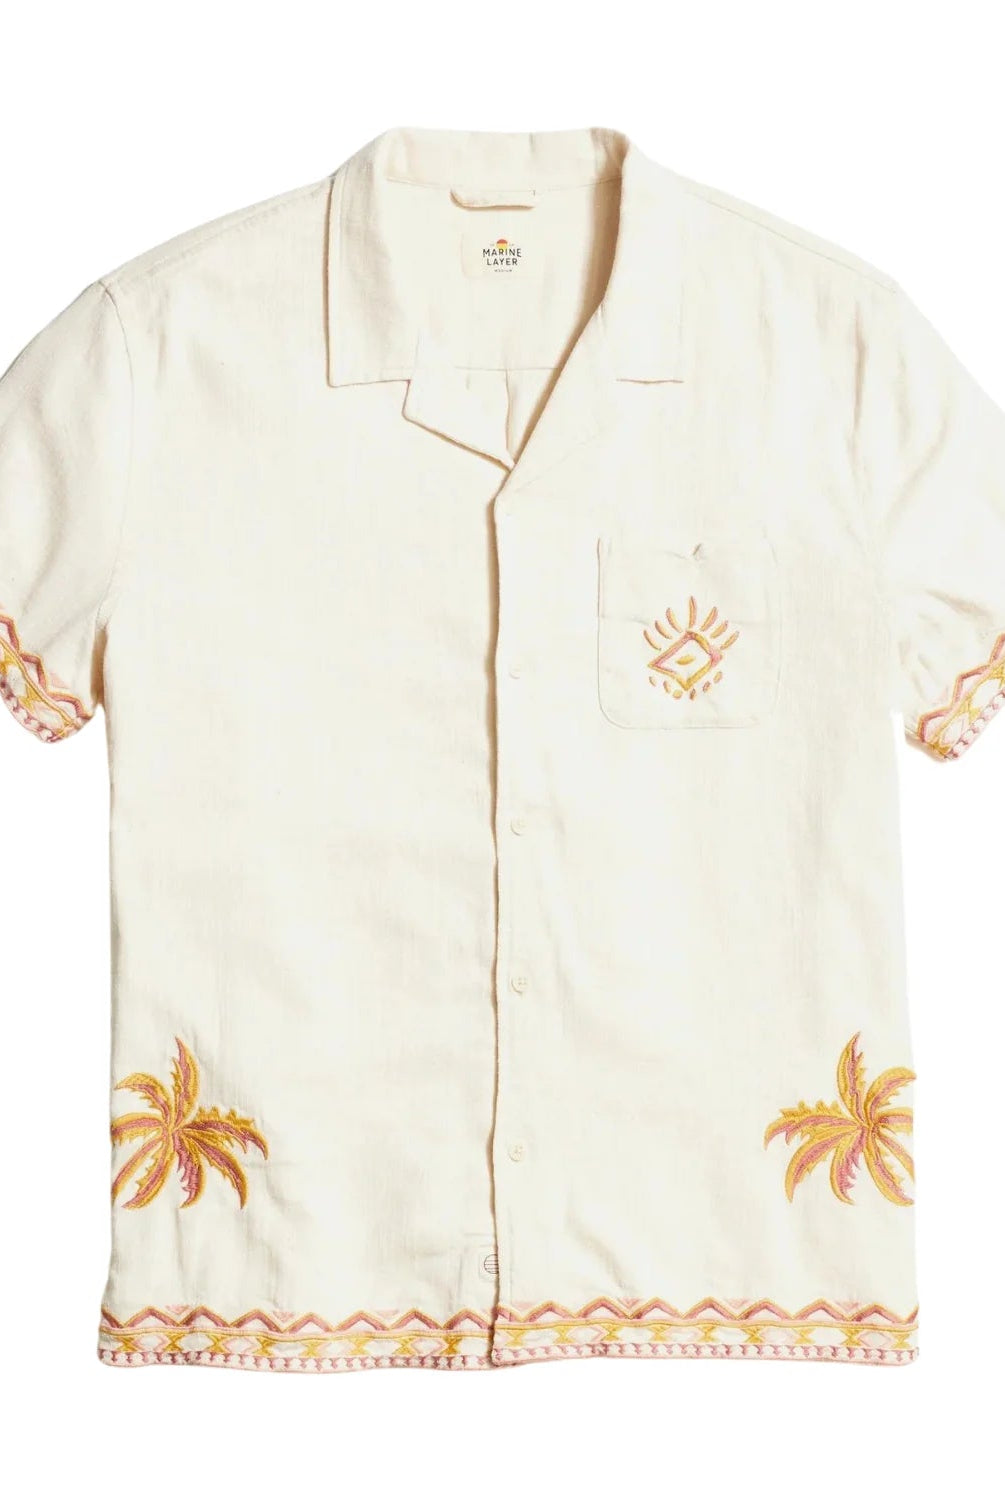 Stretch Selvage Embroidered Resort Shirt - Endless Waves